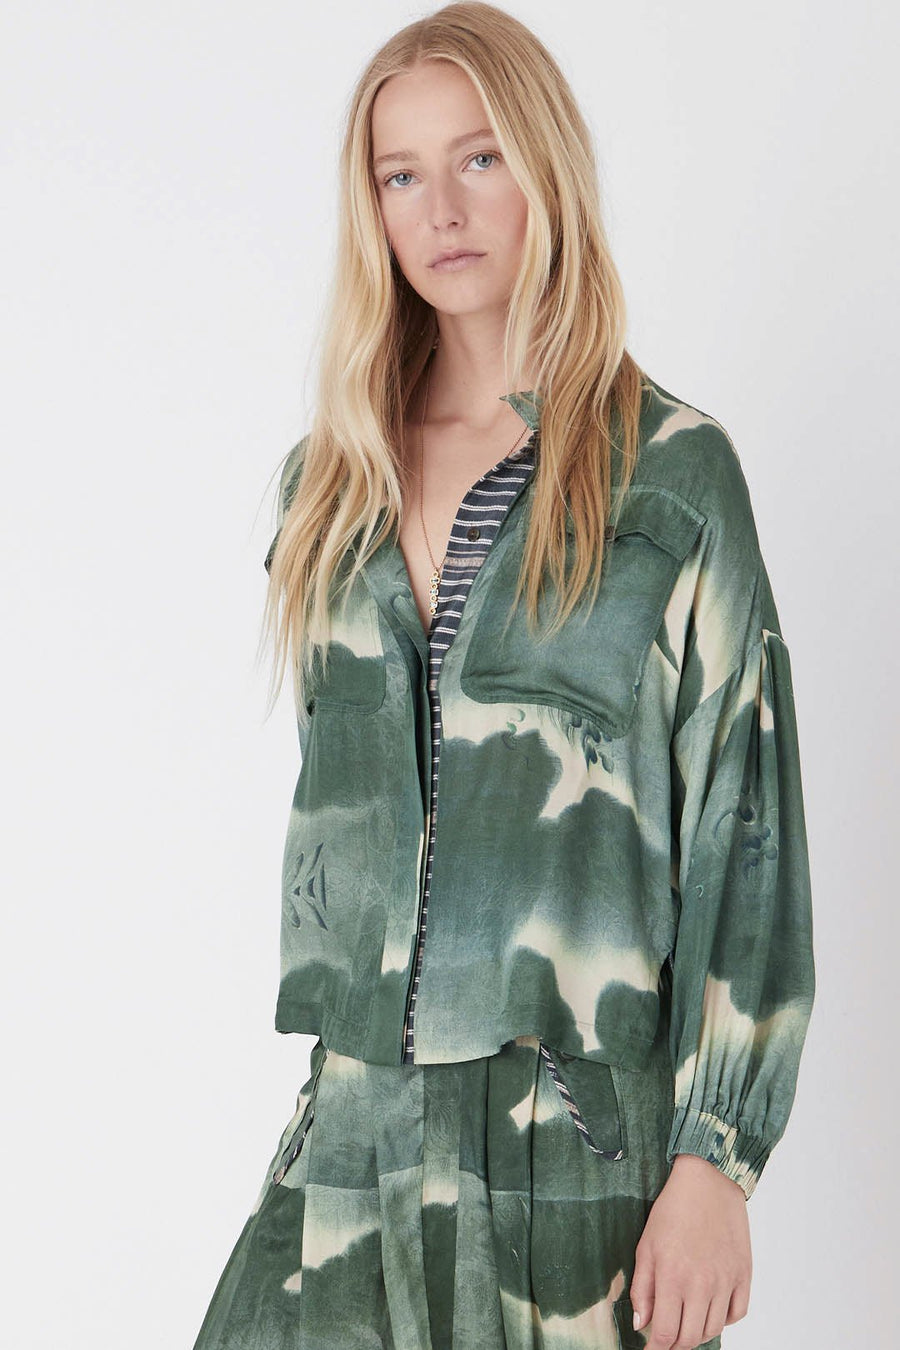 UBUD BUTTON DOWN SHIRT, ARMY - Burning Torch Online Boutique